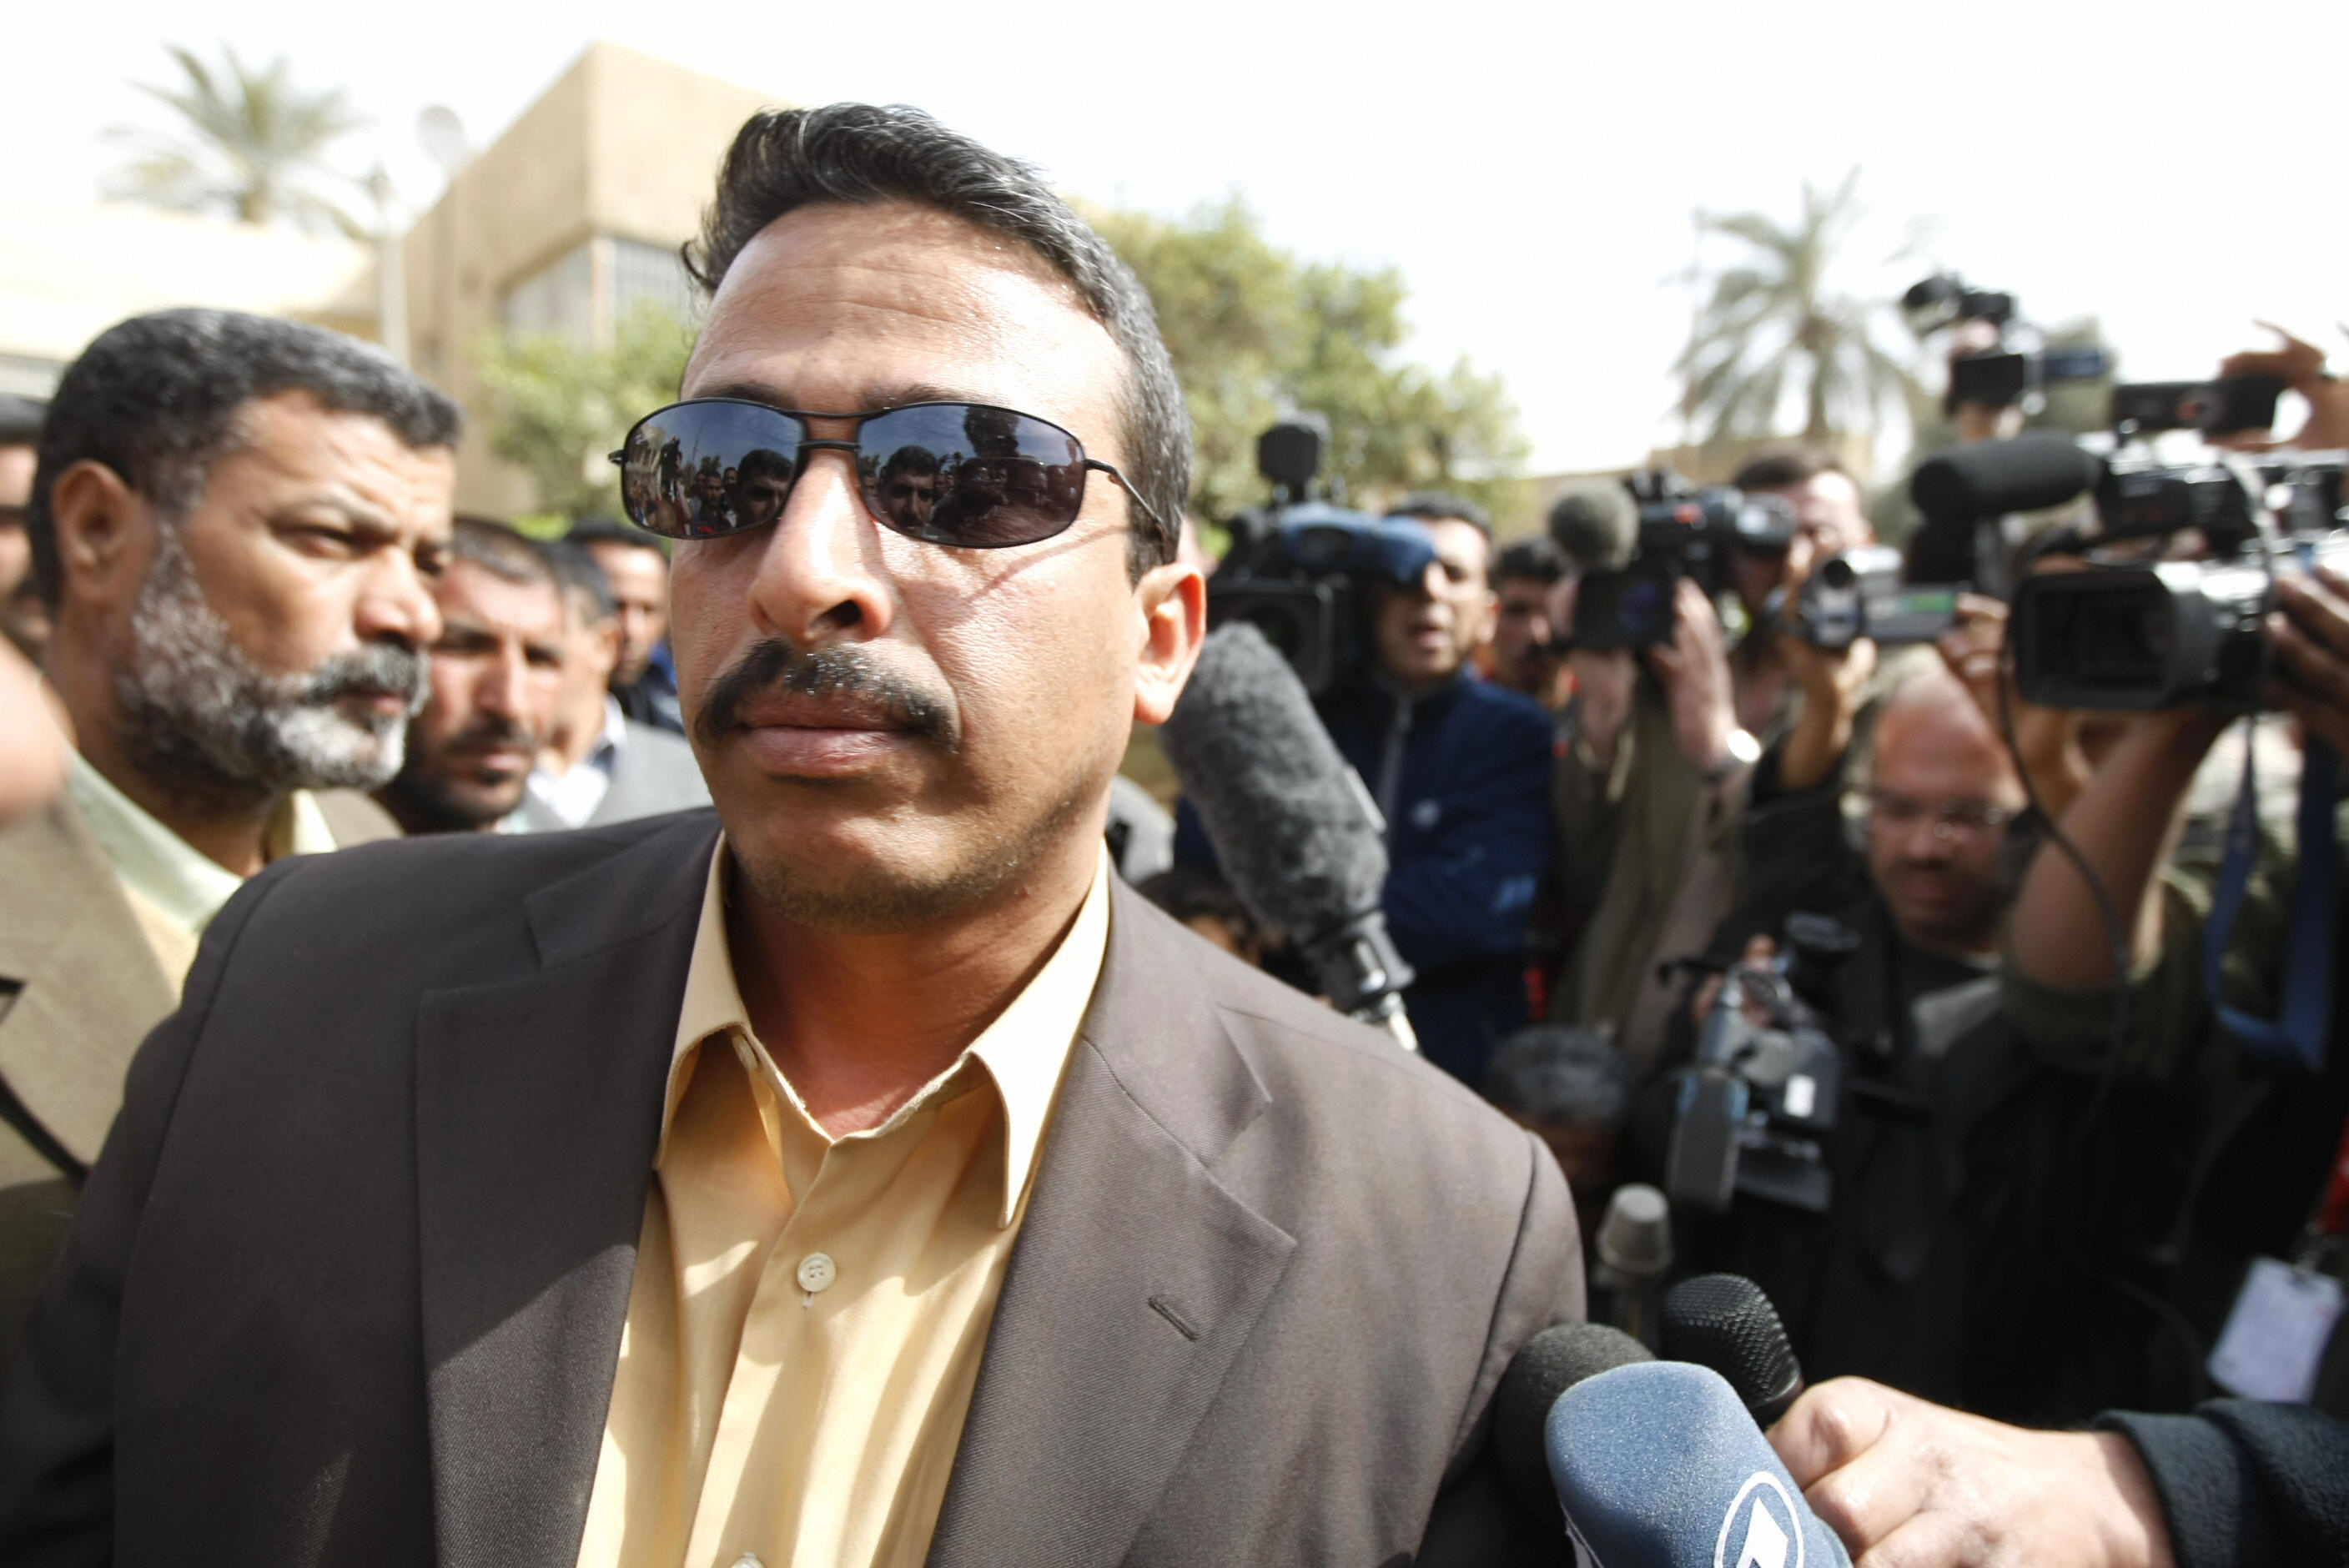 AHMAD AL-RUBAYE/AFP/Getty Images. Udai, the brother of jailed journalist Muntazer al-Zaidi, is surrounded by the press as he leaves the Central Criminal Court in Baghdad.